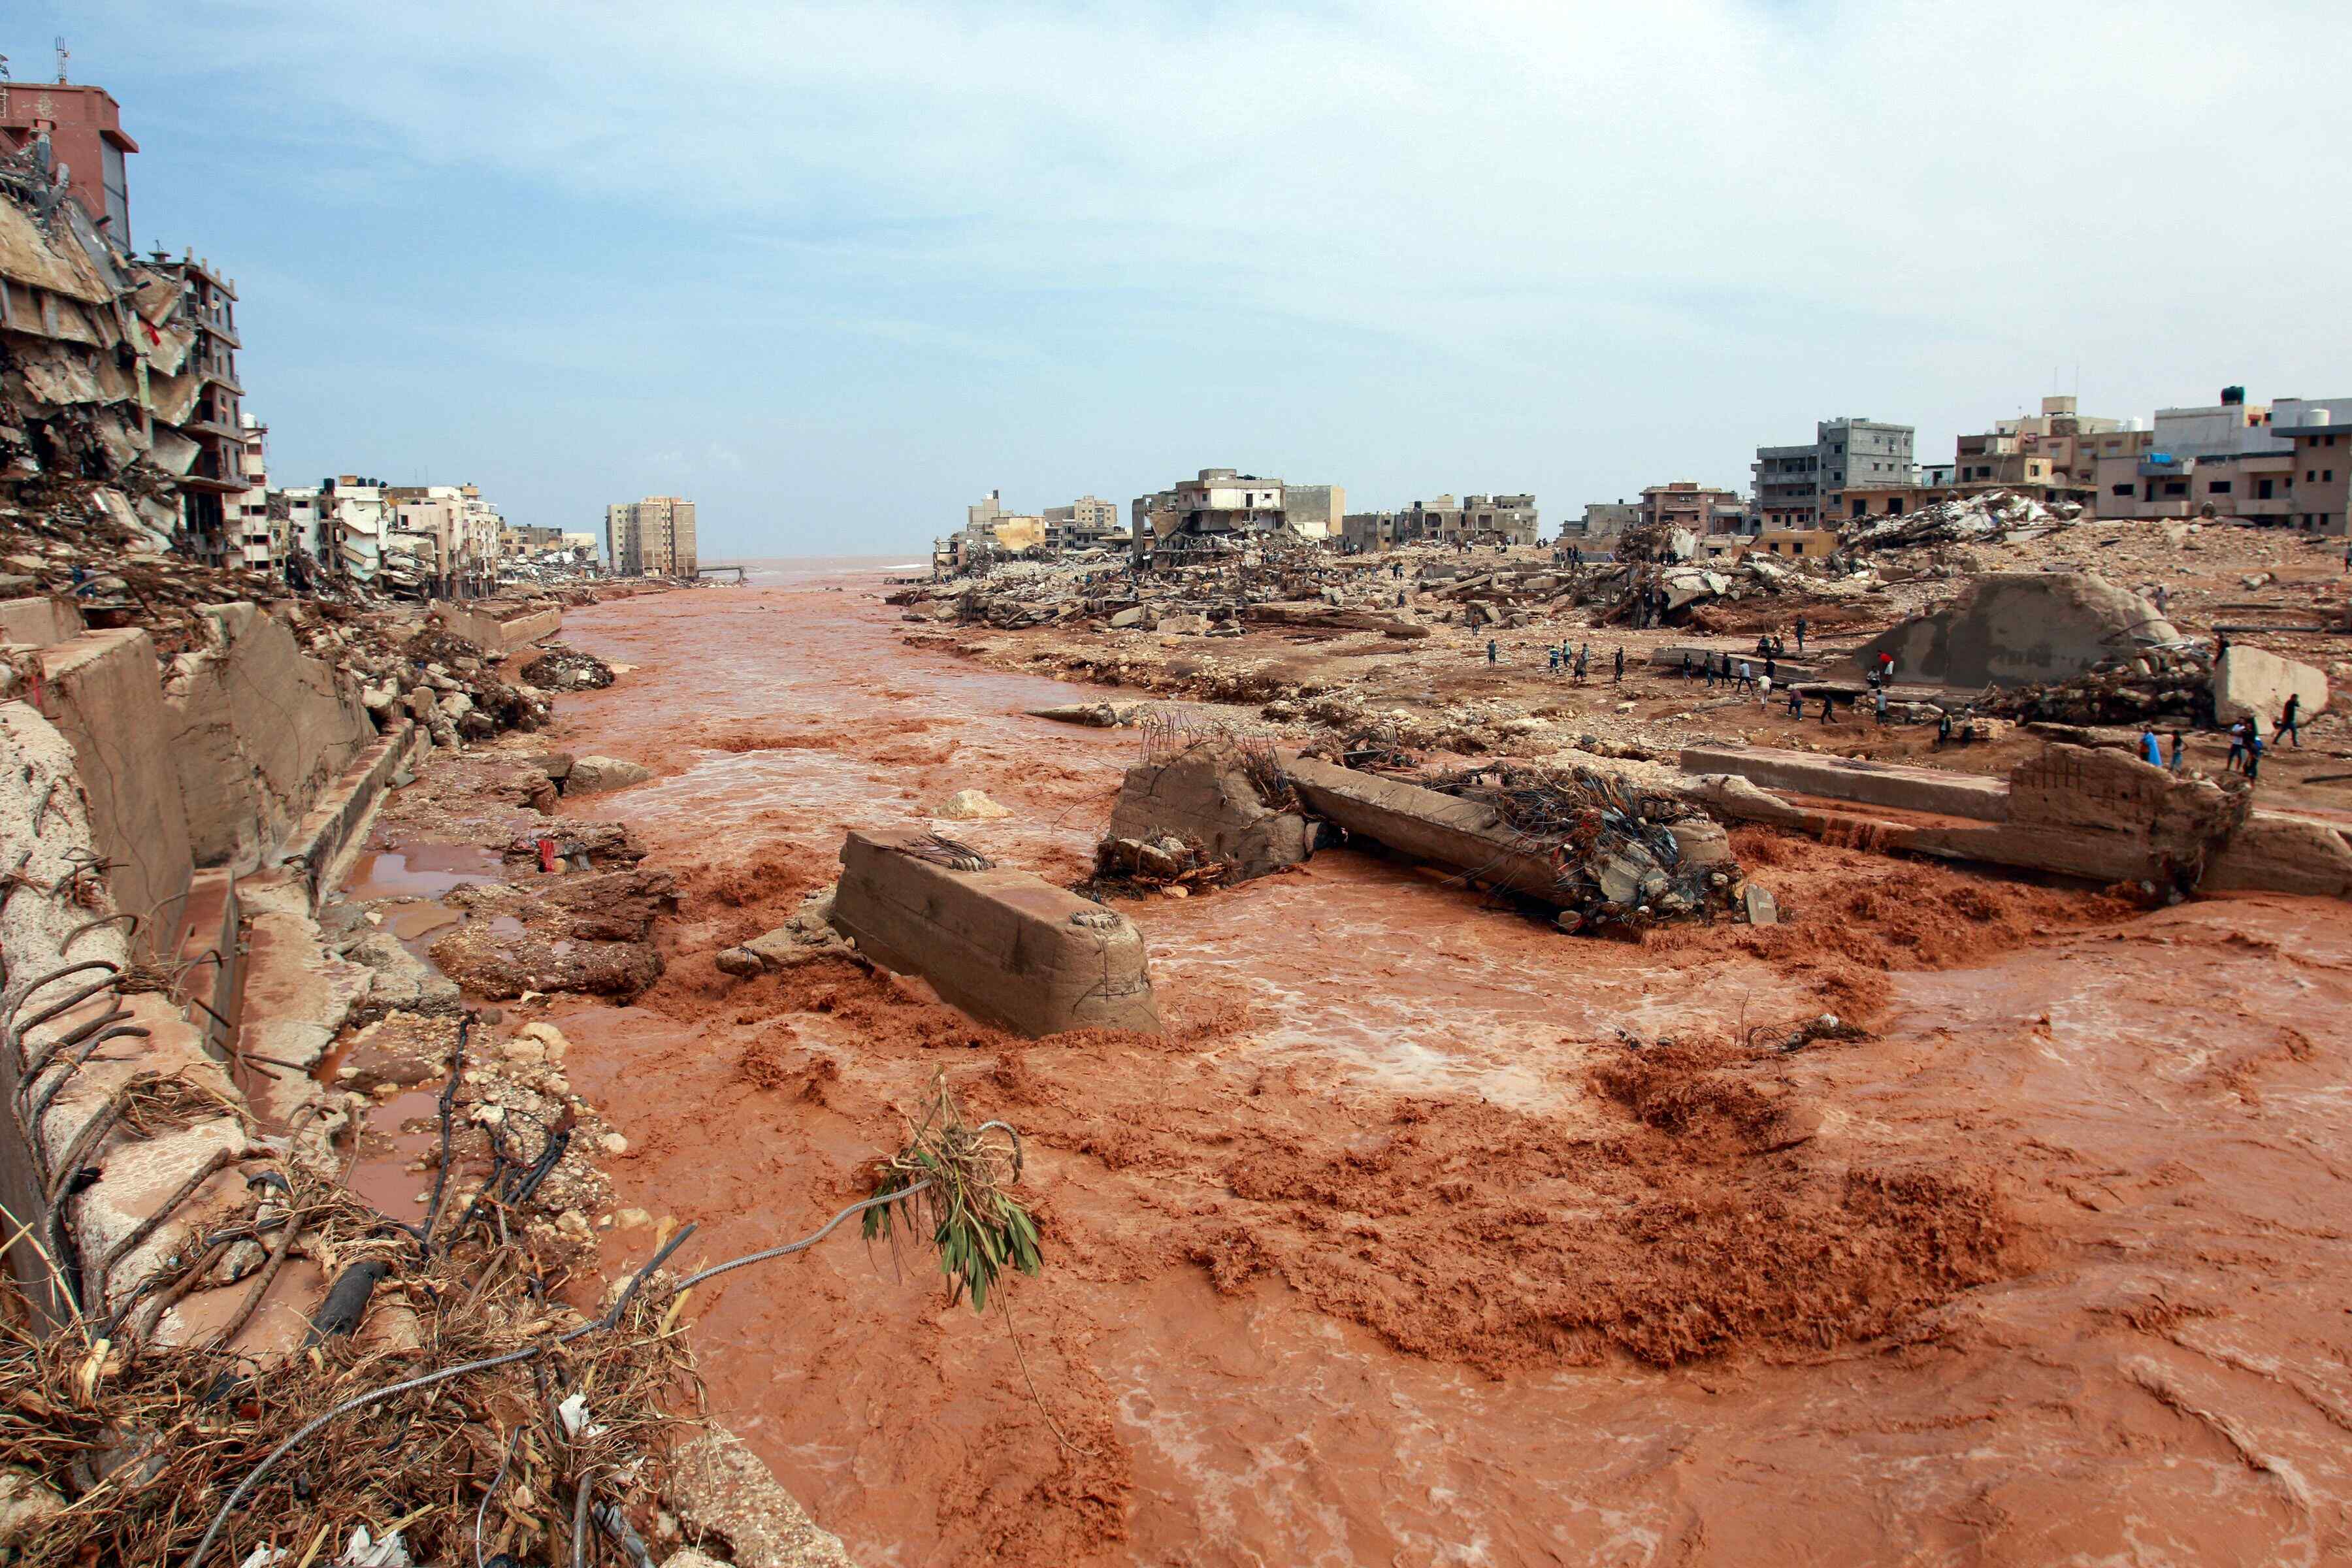 A large portion of the city of Derna, Libya has been swept away by floodwaters. Residents inspect the damage.